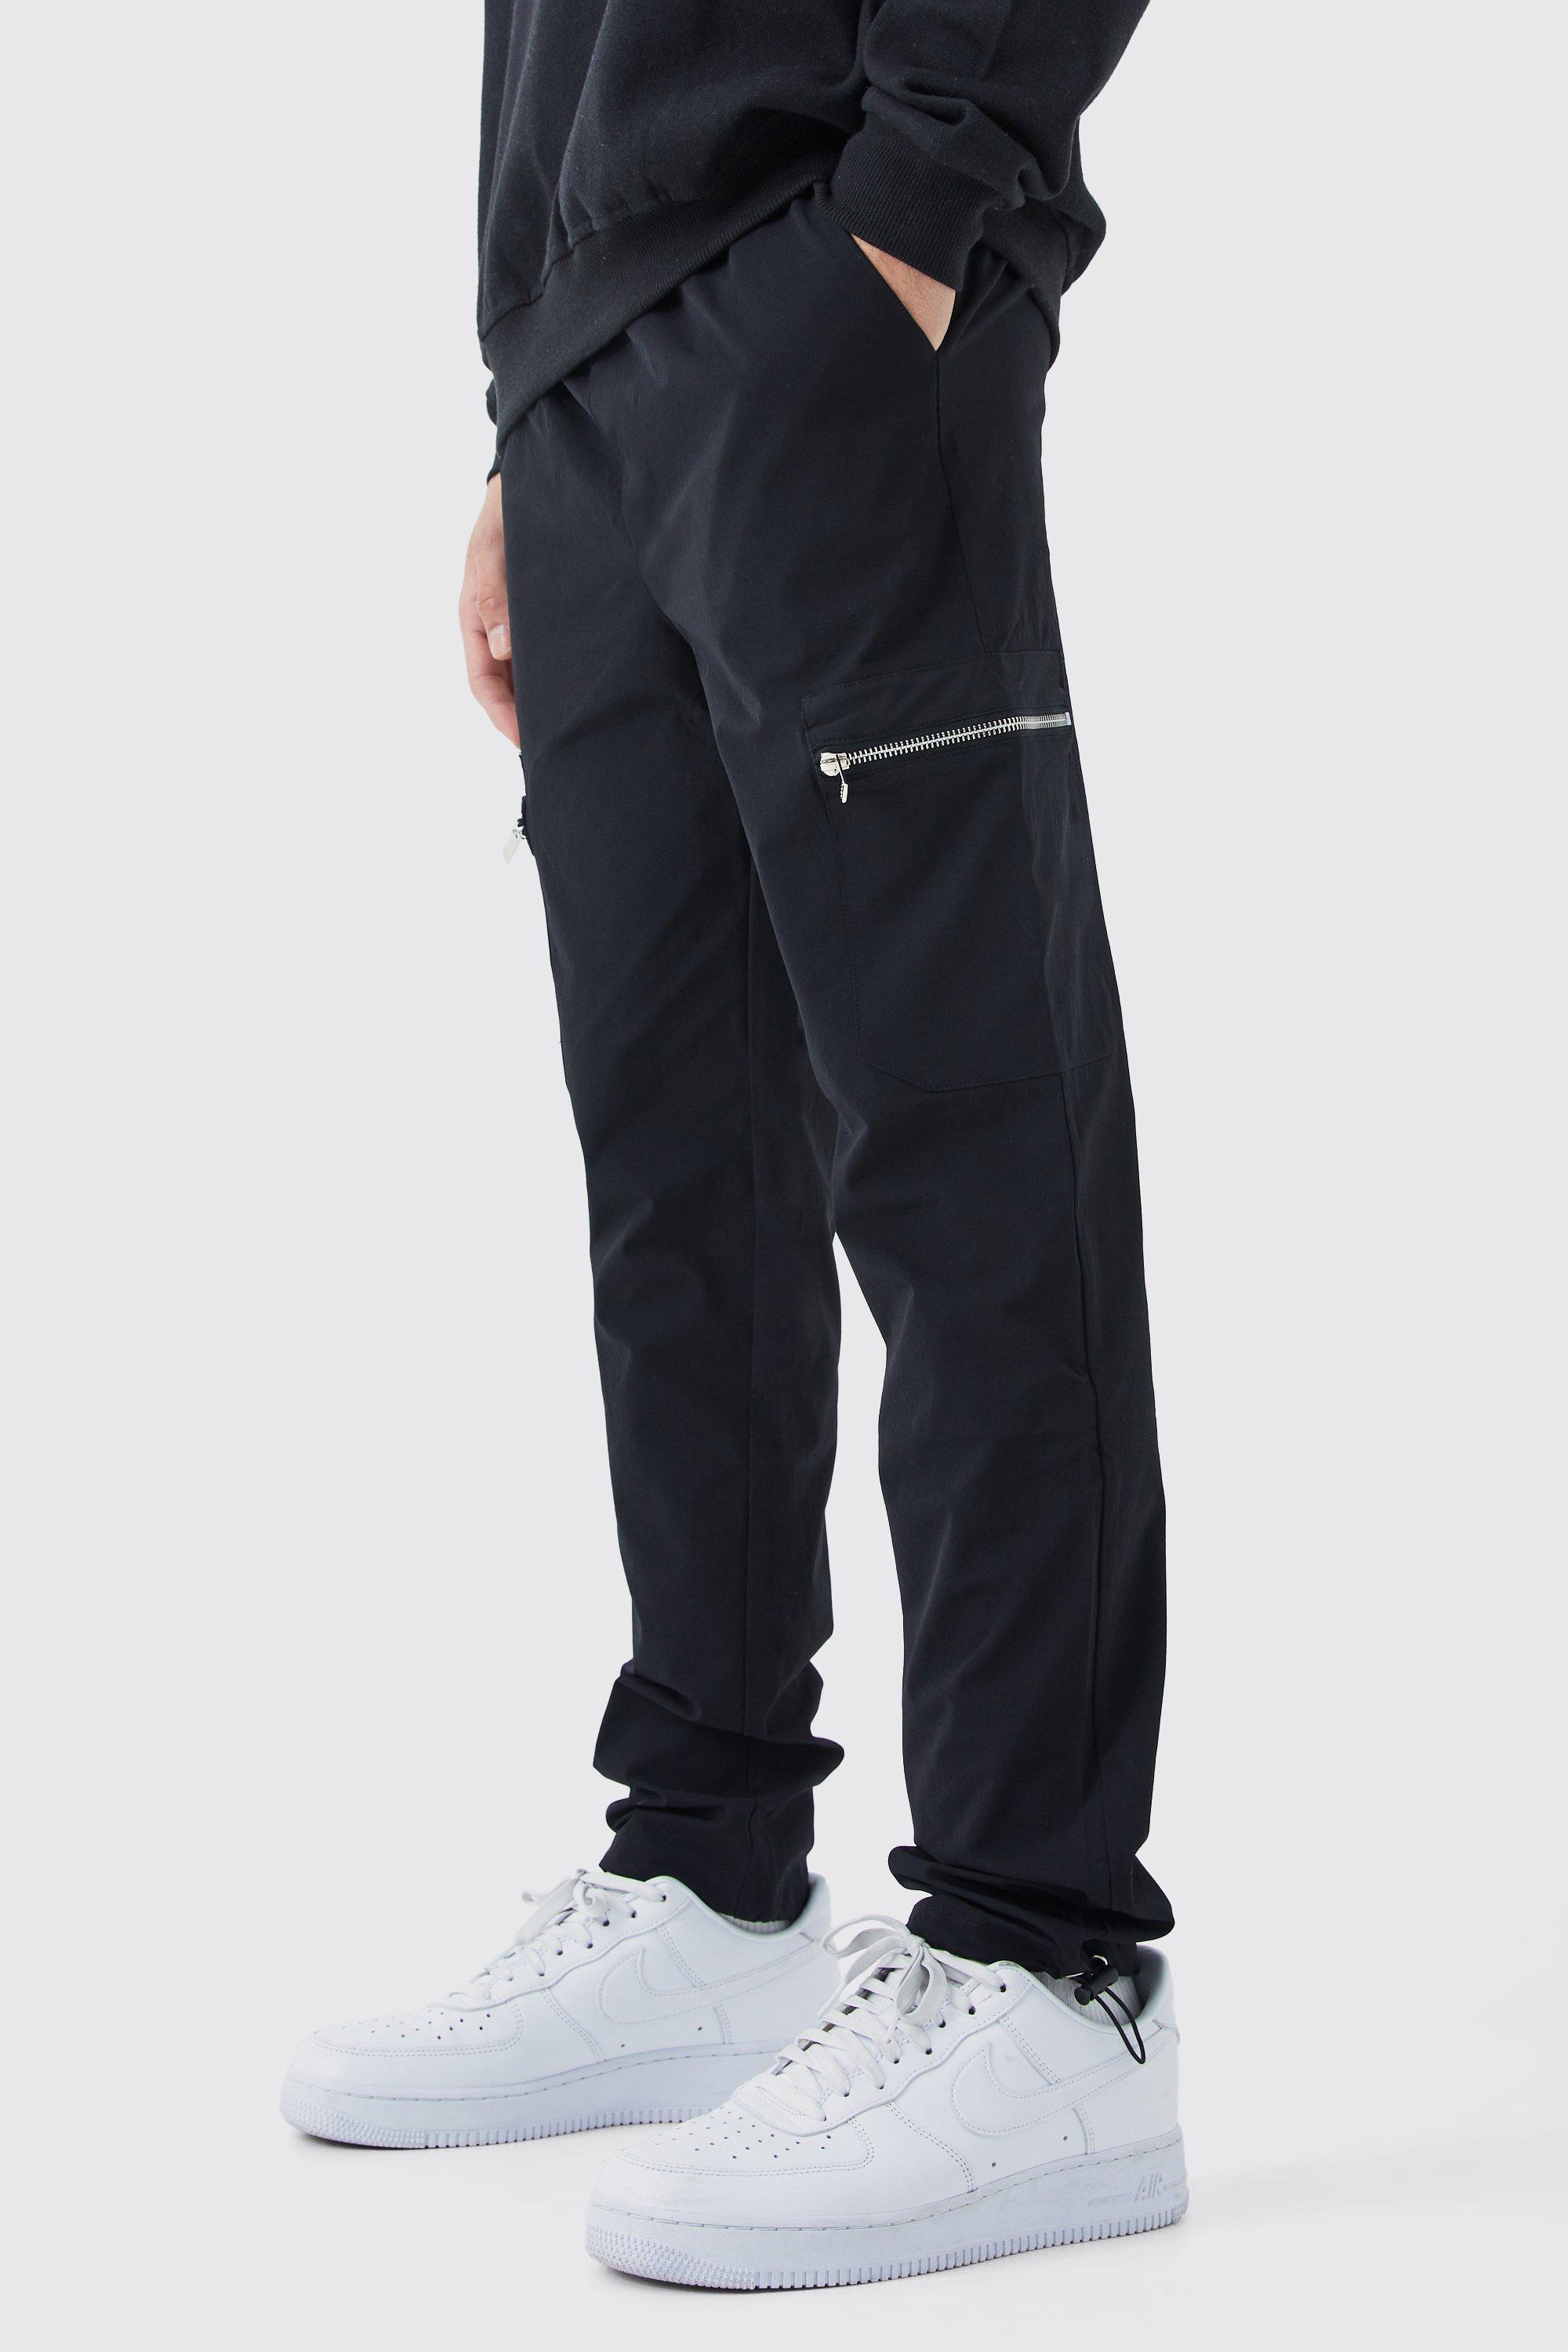 BoohooMAN Elasticated Waist Slim Technical Stretch Cargo Pants in Blue for  Men